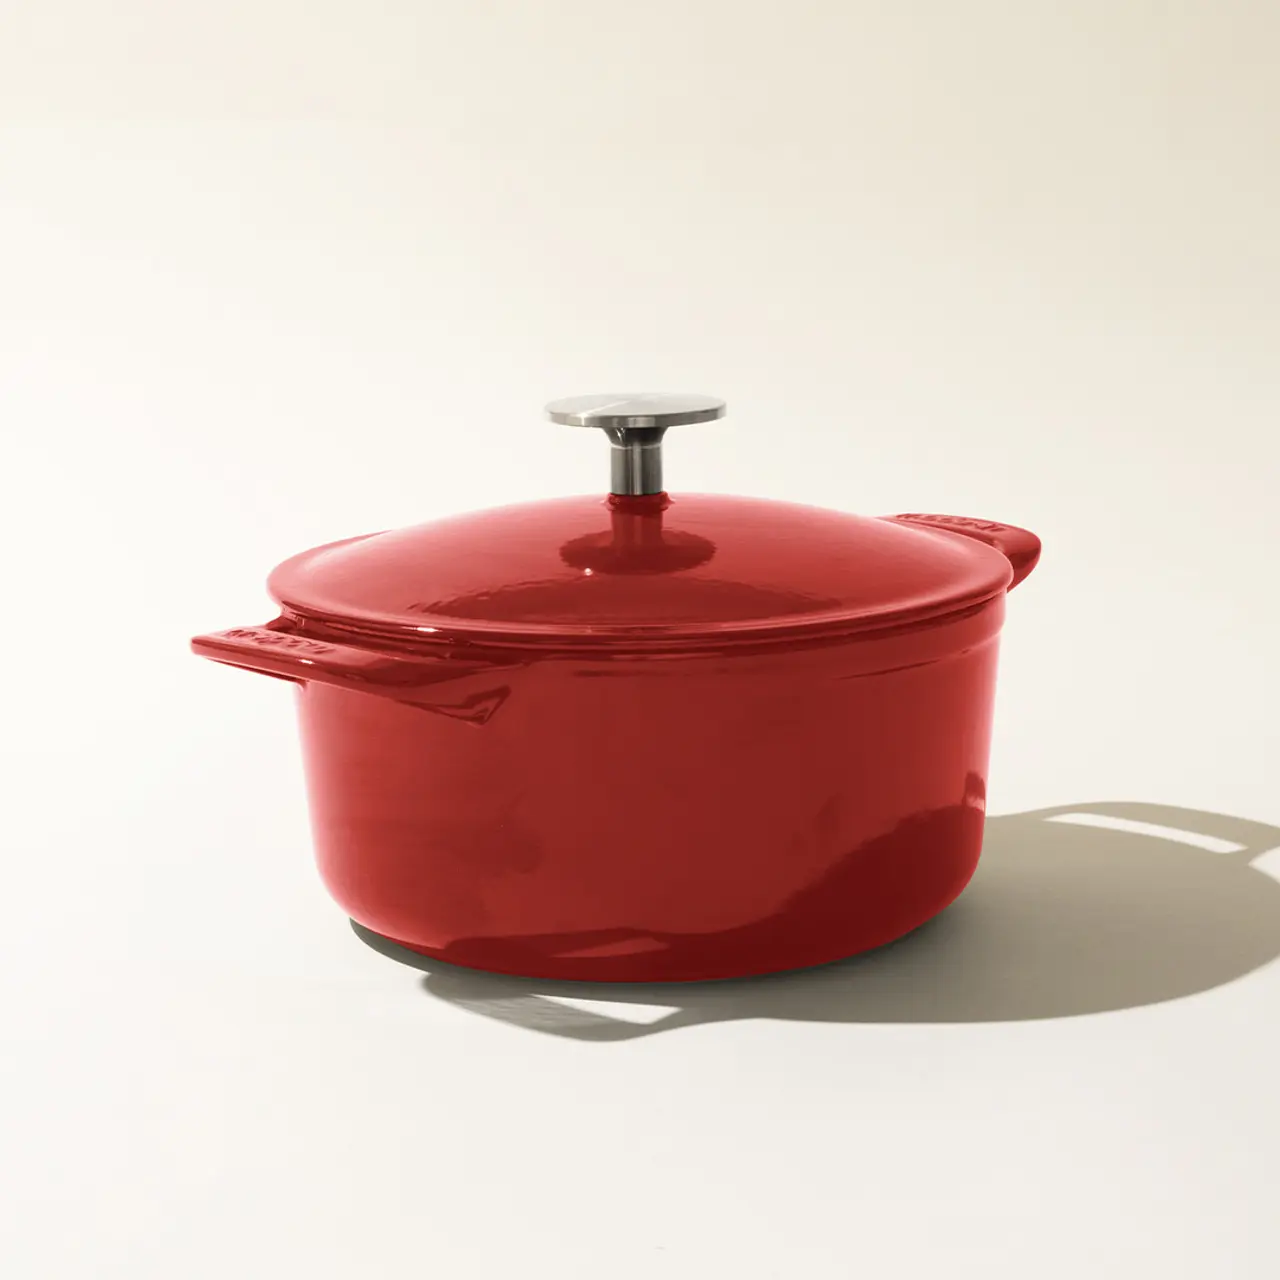 A red enameled cast-iron Dutch oven with a lid, on a light background casting a soft shadow.